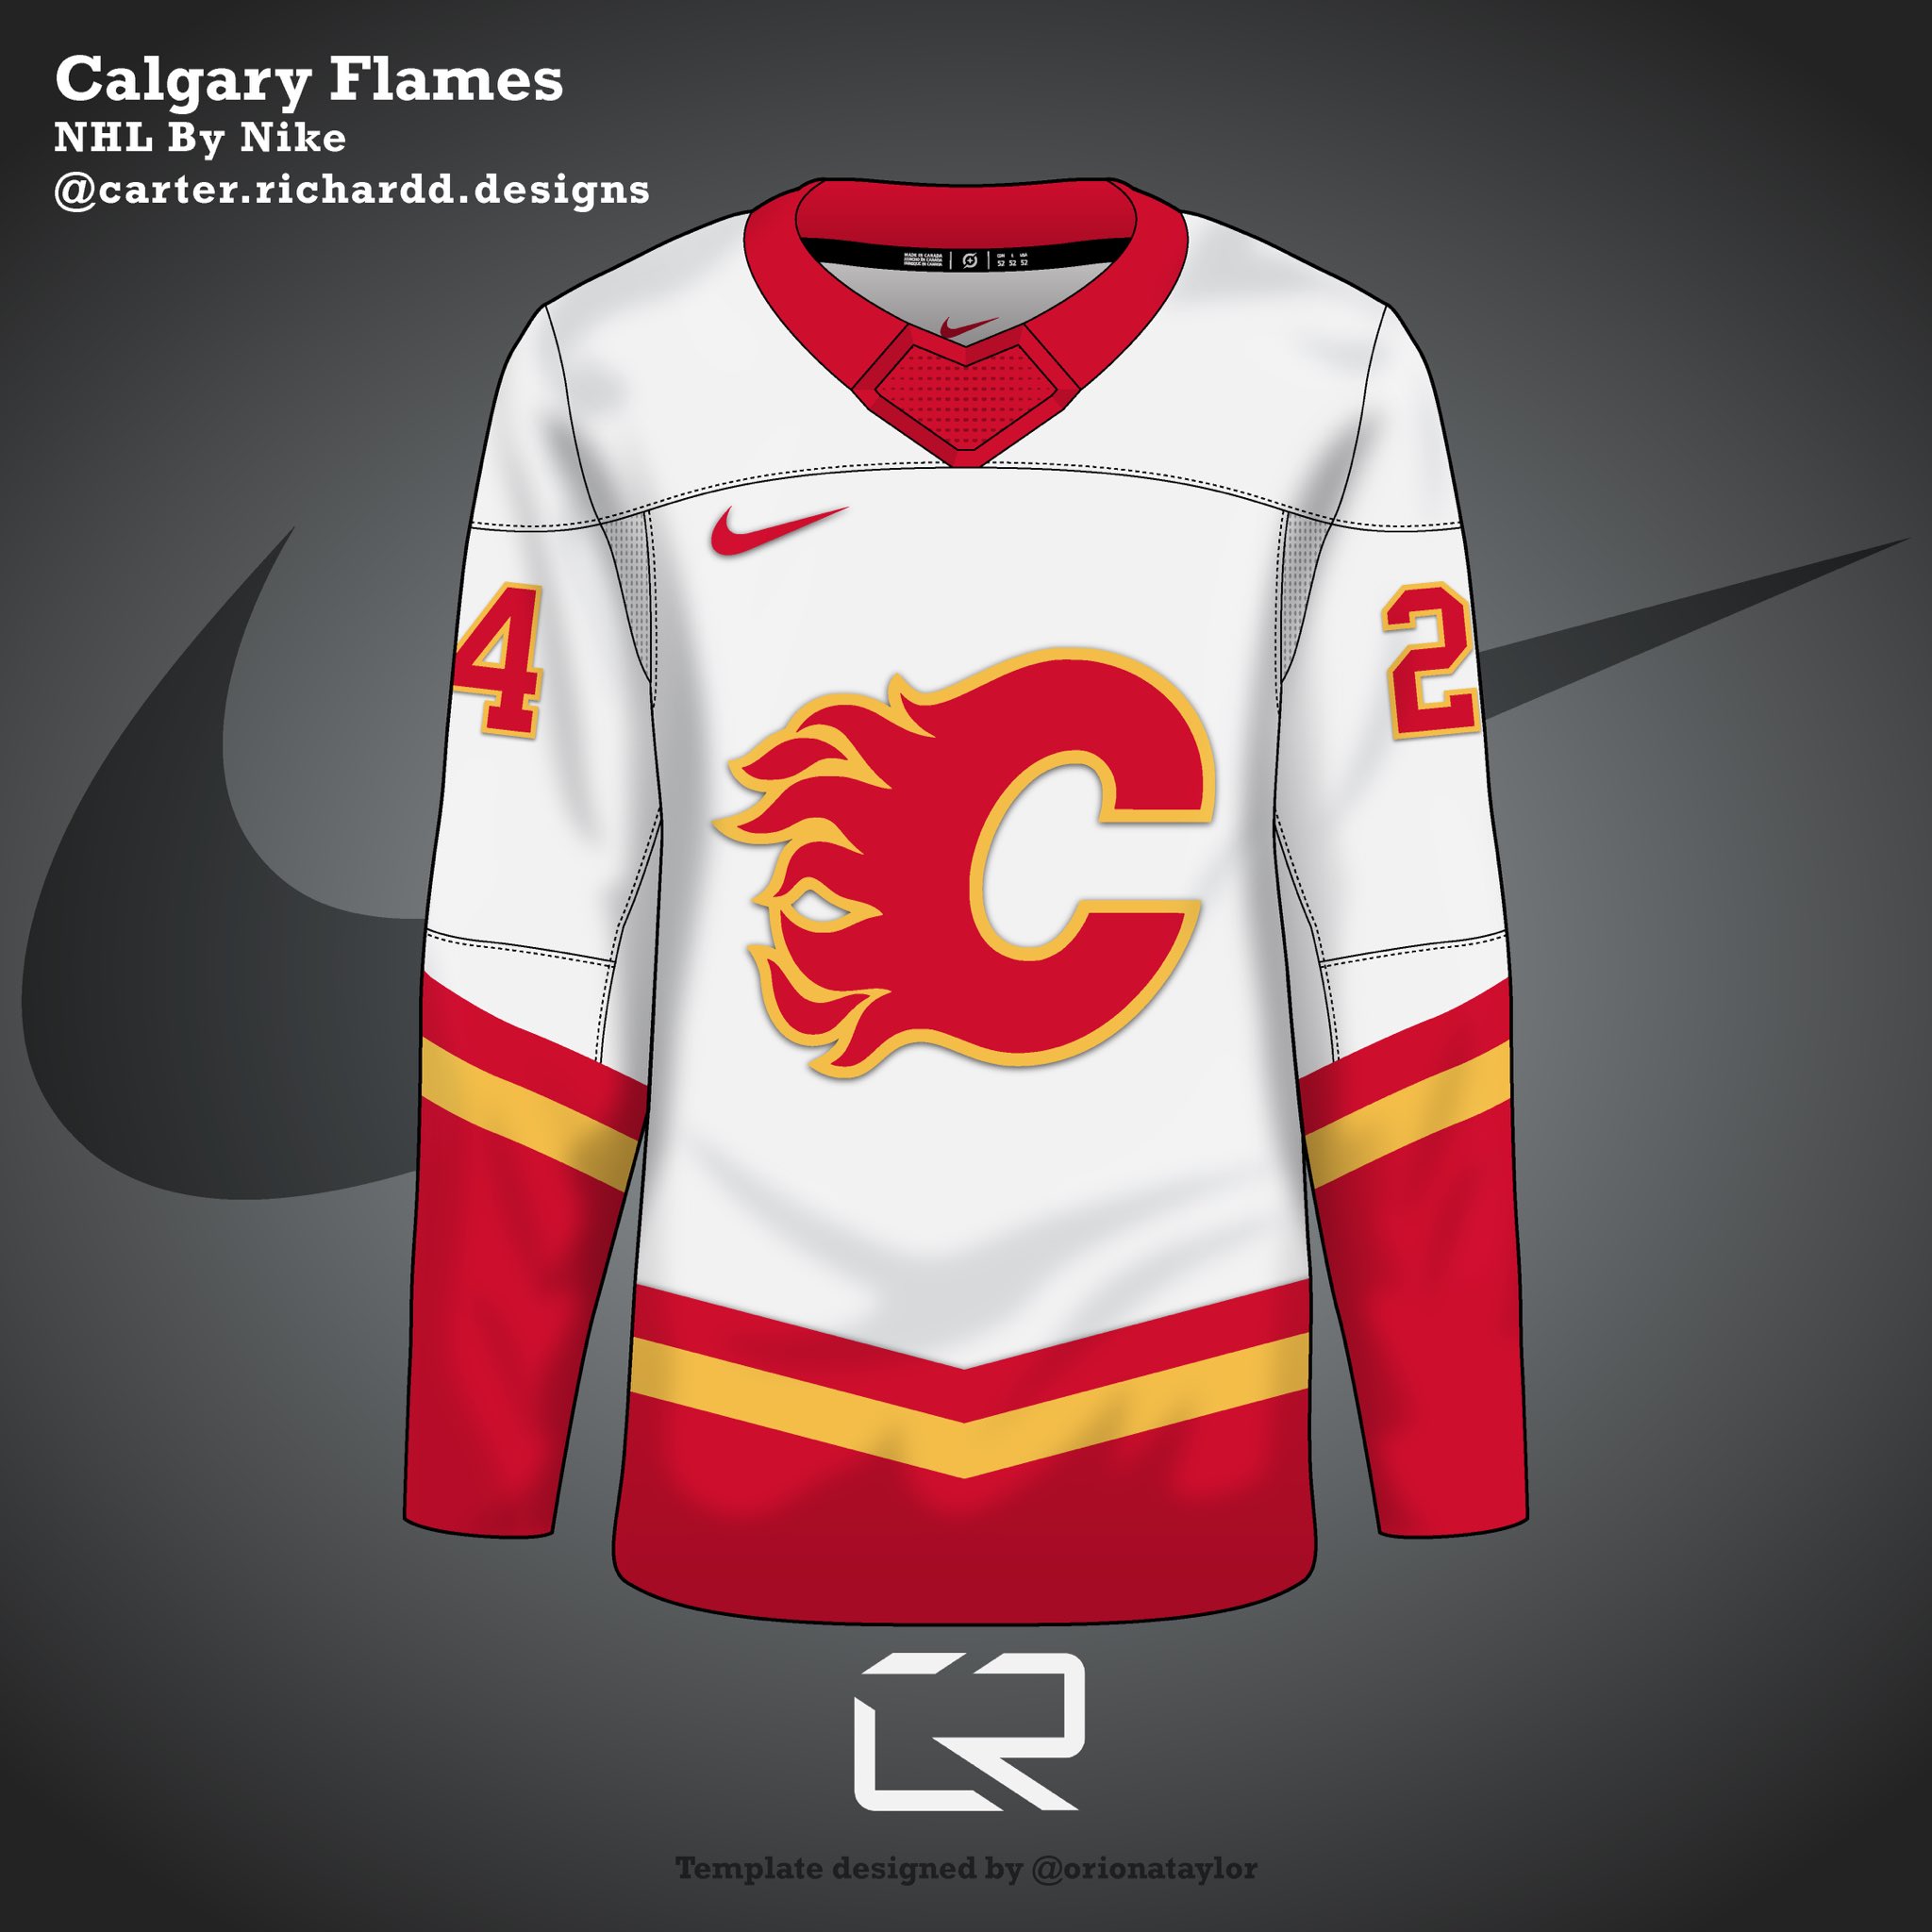 Calgary Flames alternate concept that uses the striping patterns